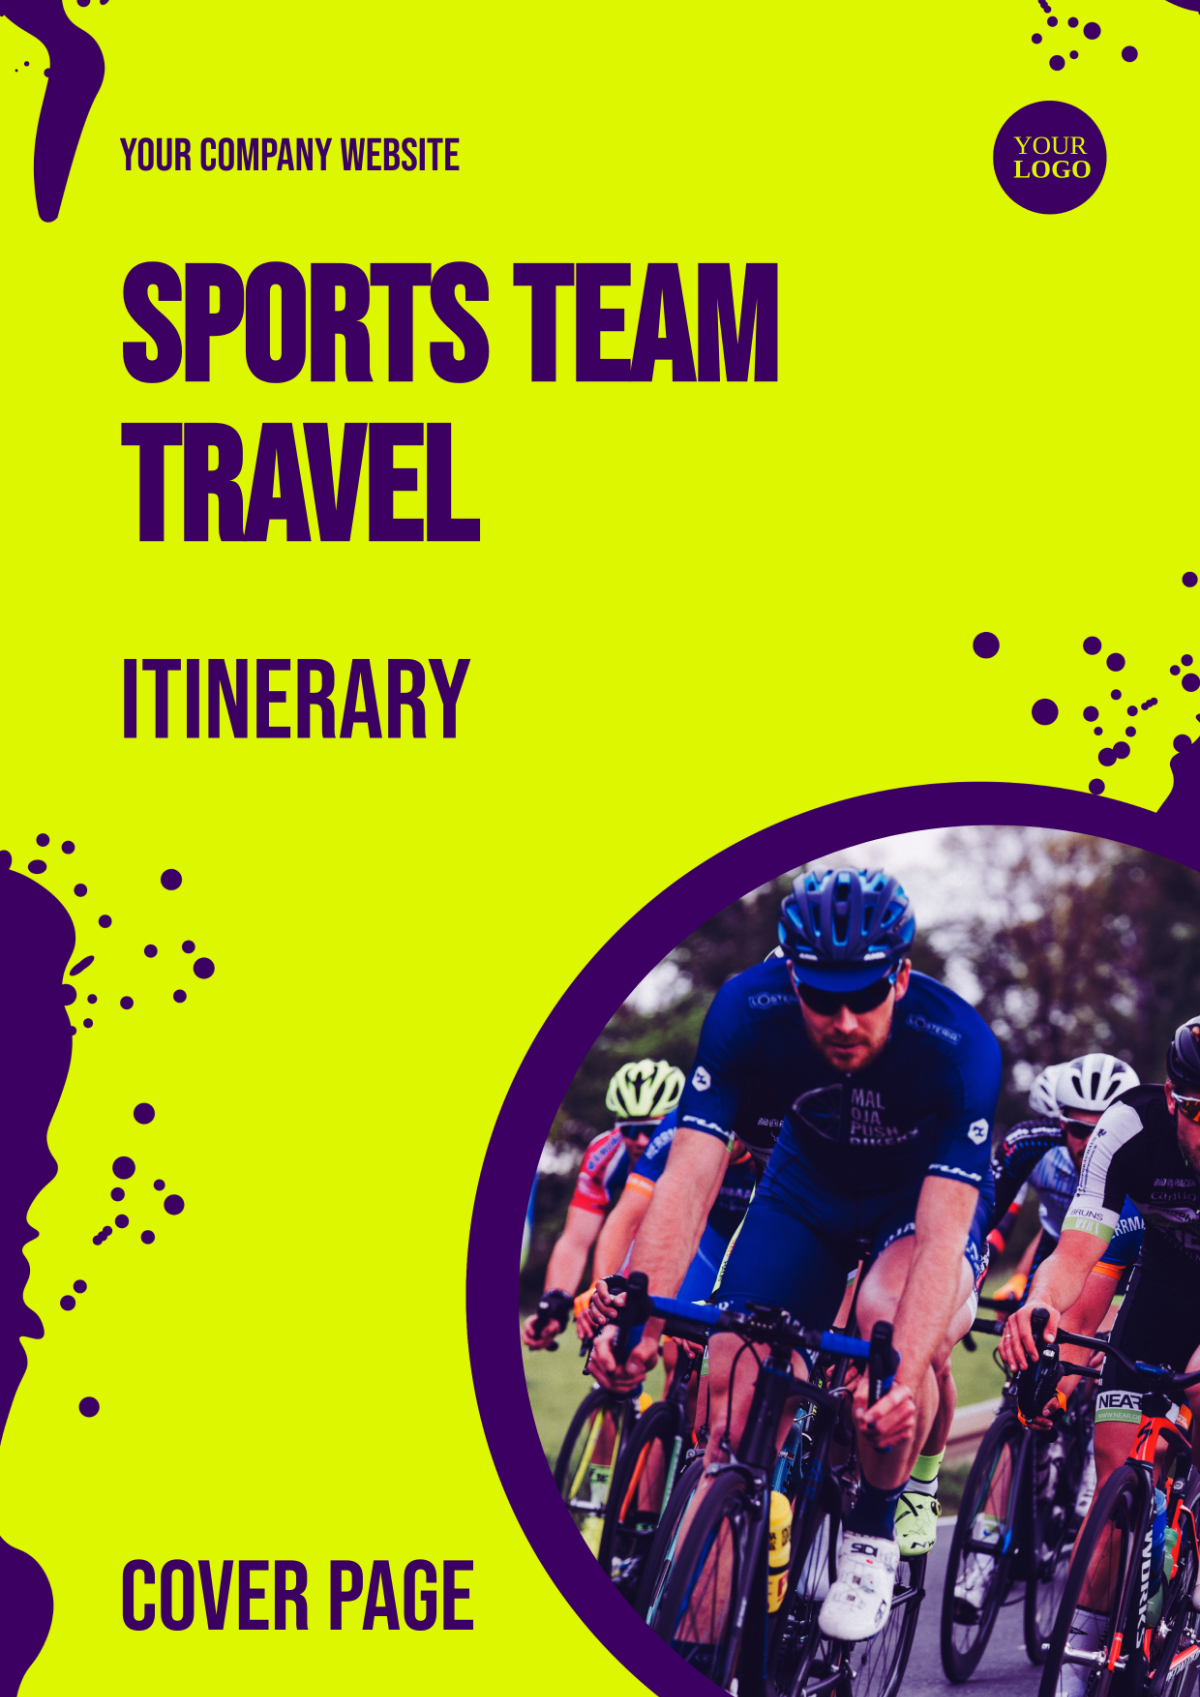 Sports Team Travel Itinerary Cover Page Template